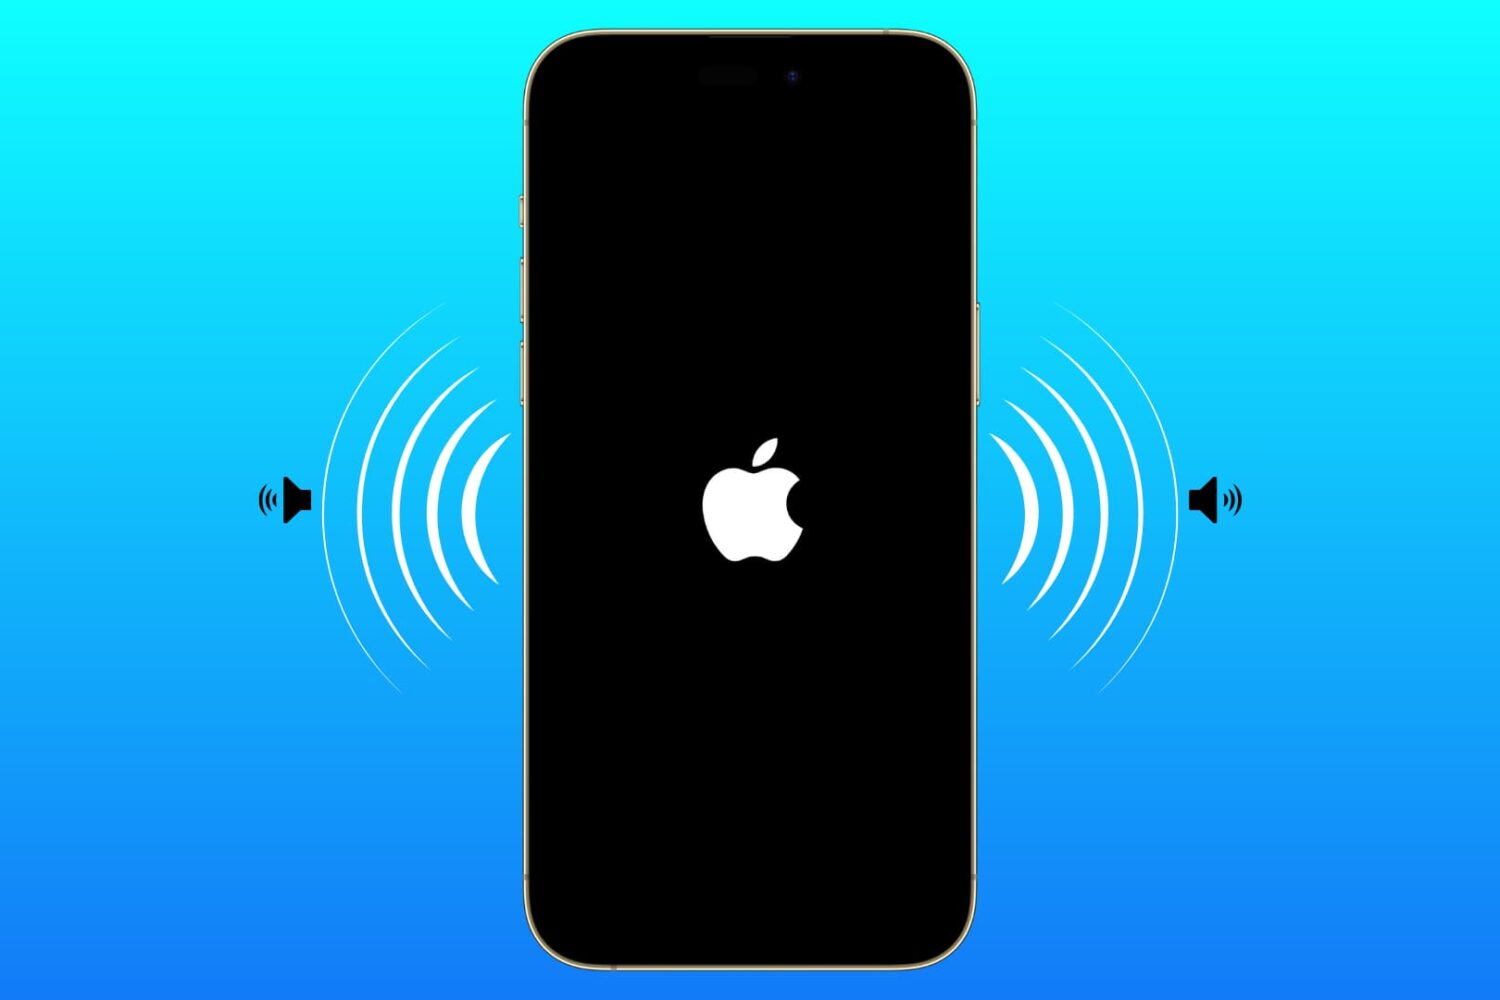 Composition showing iPhone power on sound when it is on the Apple logo screen